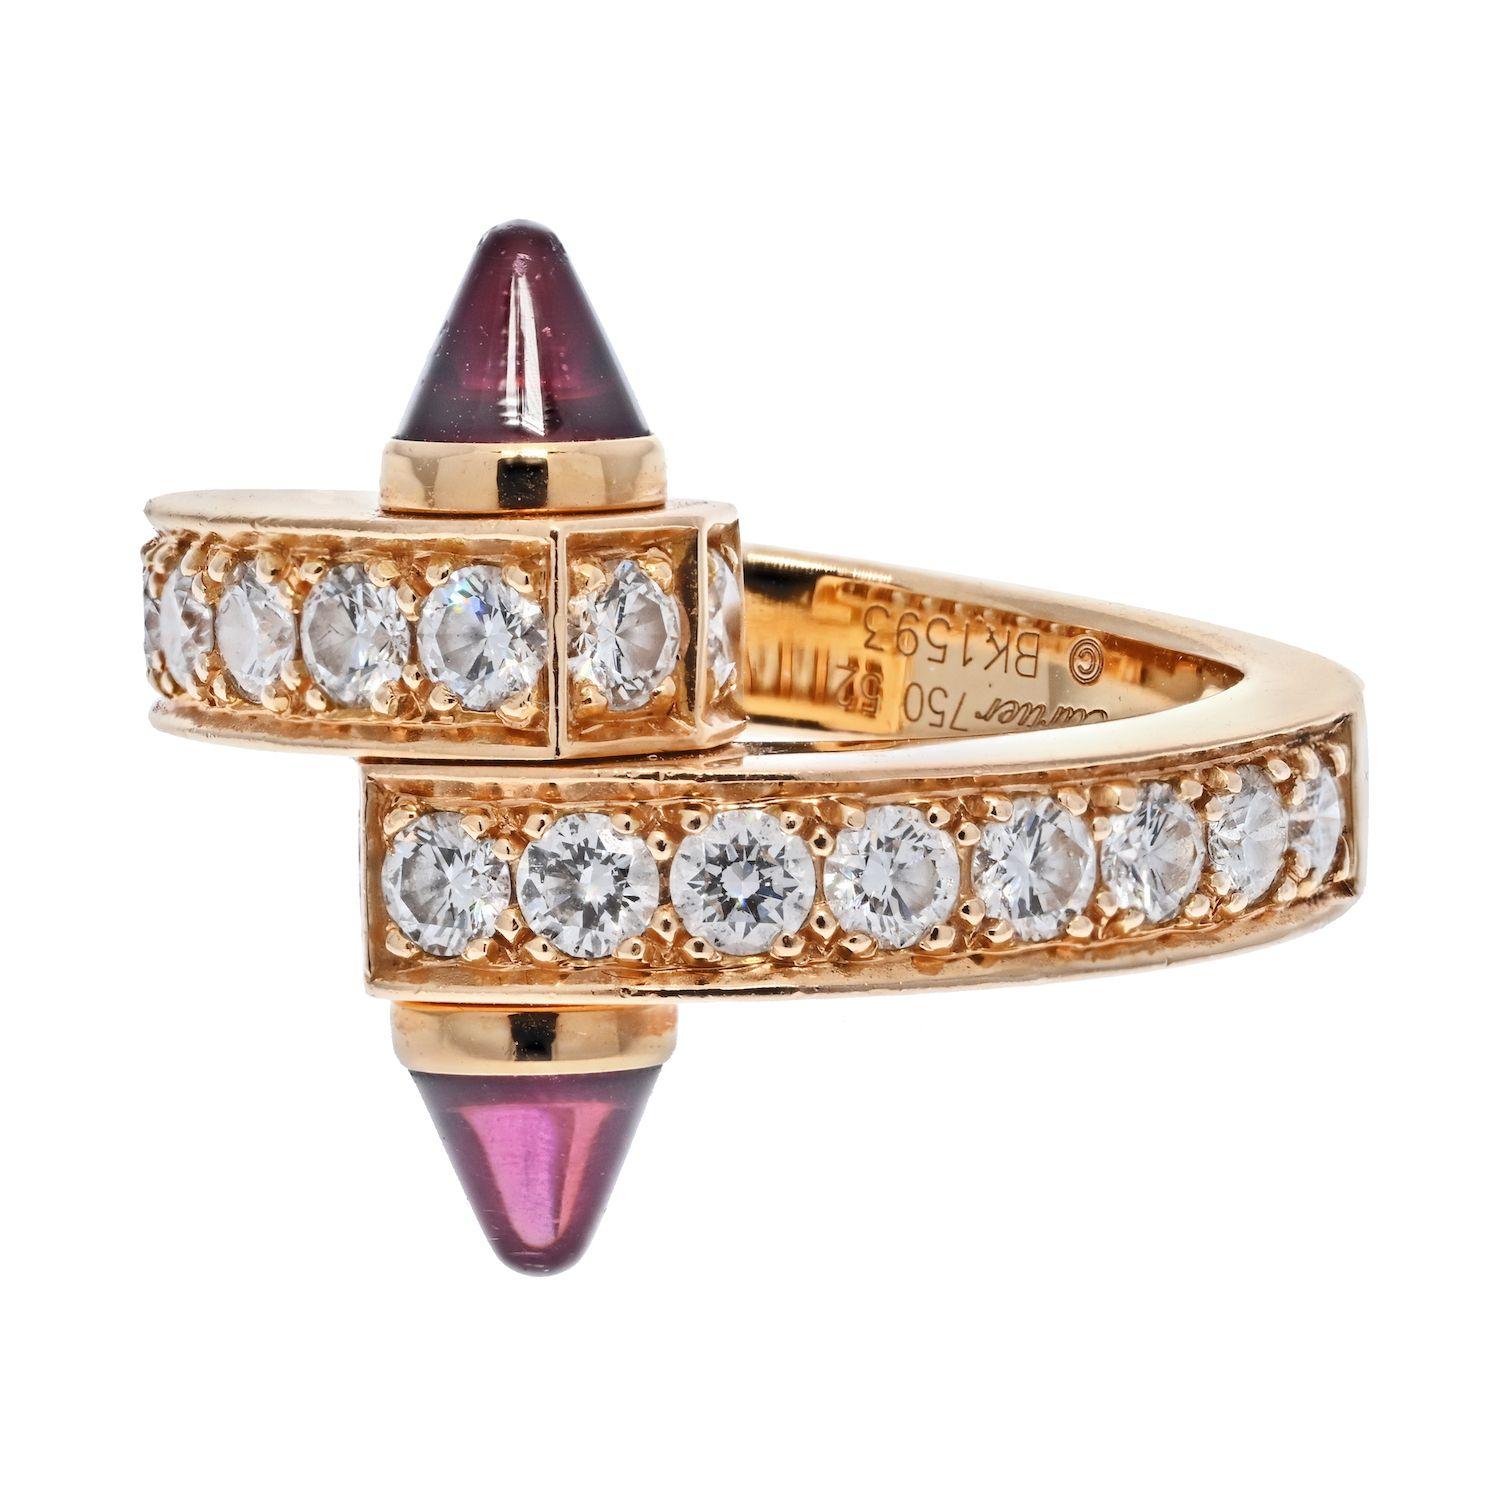 Cartier Menotte 18K Rose Gold Diamond and Garnet Ring. 
Bypass diamond ring from the Cartier Menotte Collection. Signed and numbered Cartier 750. Size 6. Designed as a screw motif set with round brilliant cut diamond accented by cabochon garnet